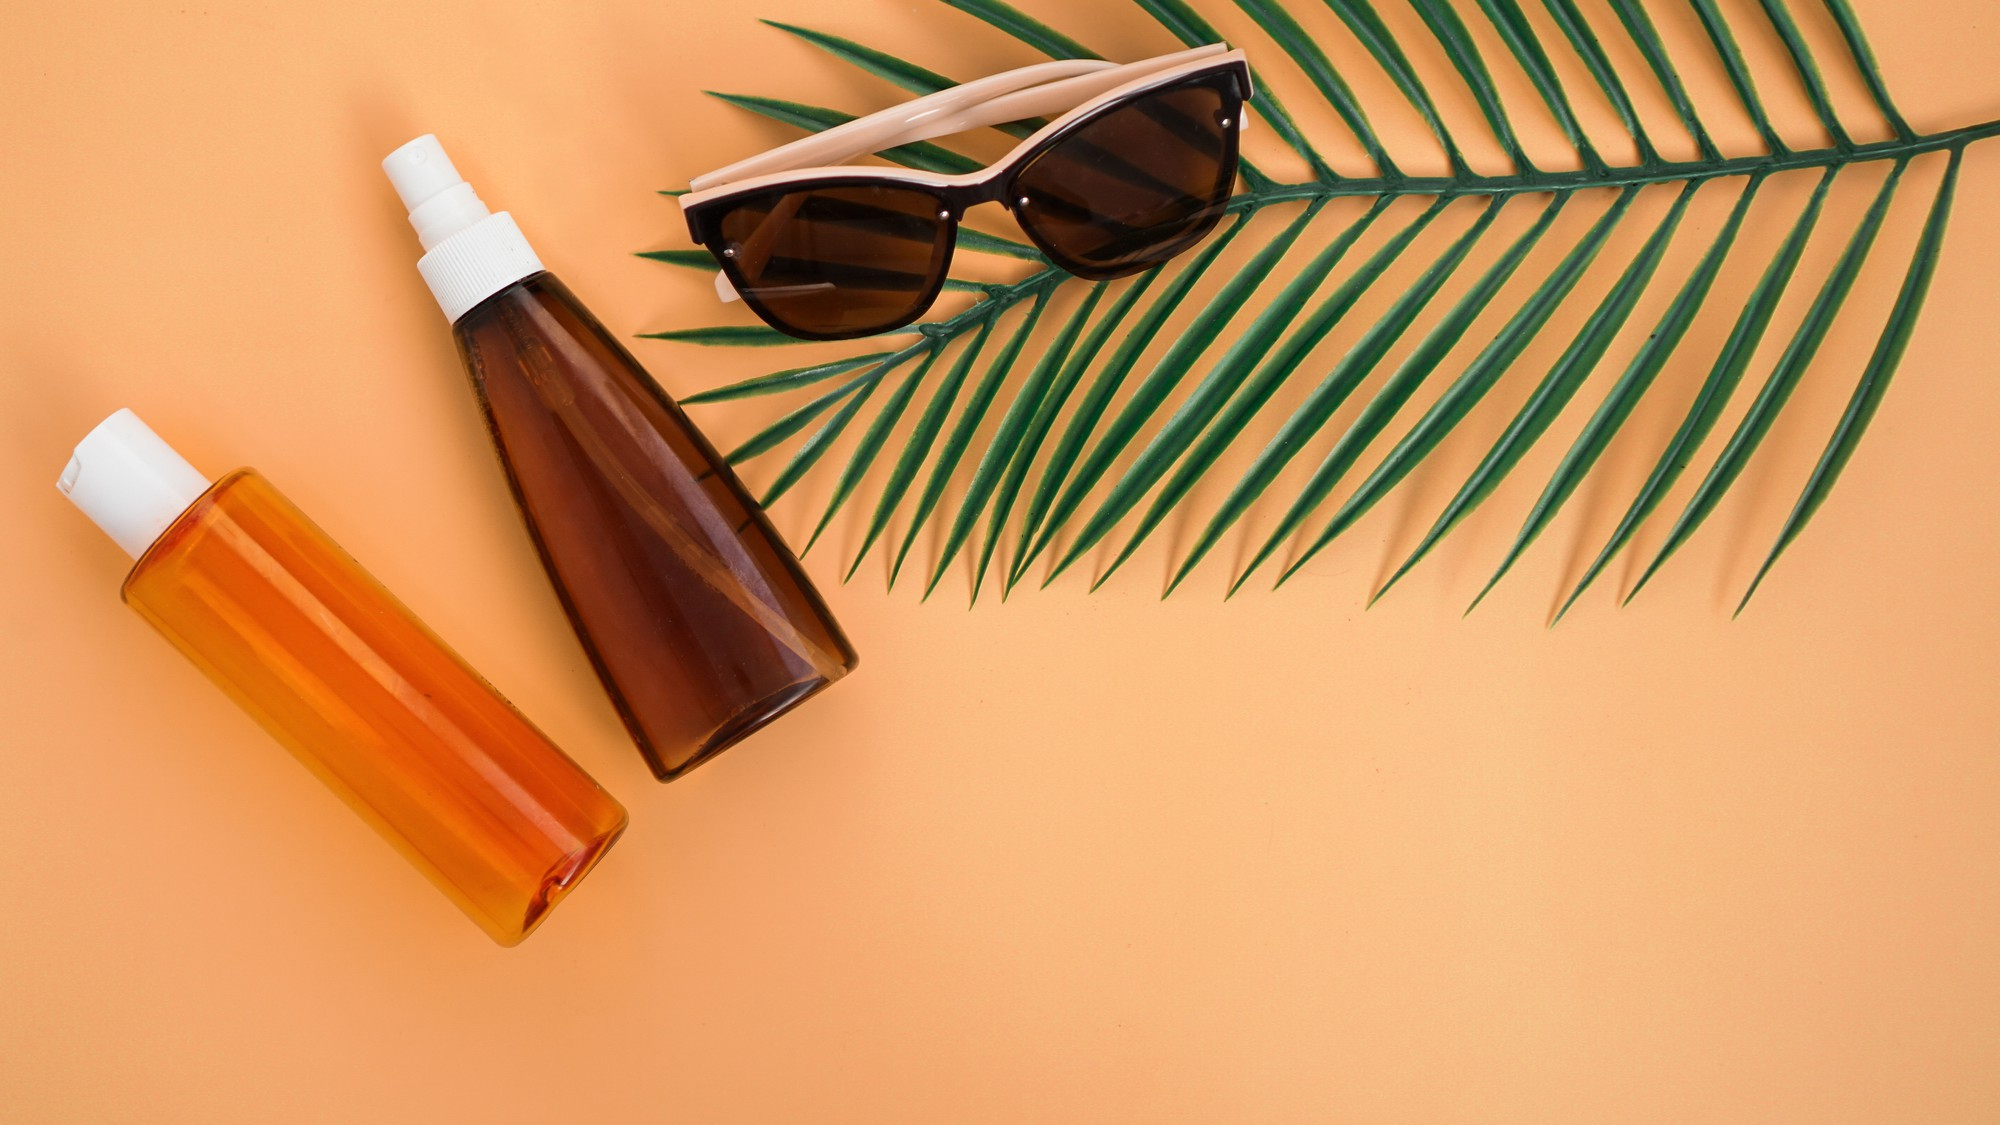 sunglasses-sun-lotion-palm-leaves-flat-lay-top-view-soft-orange-background